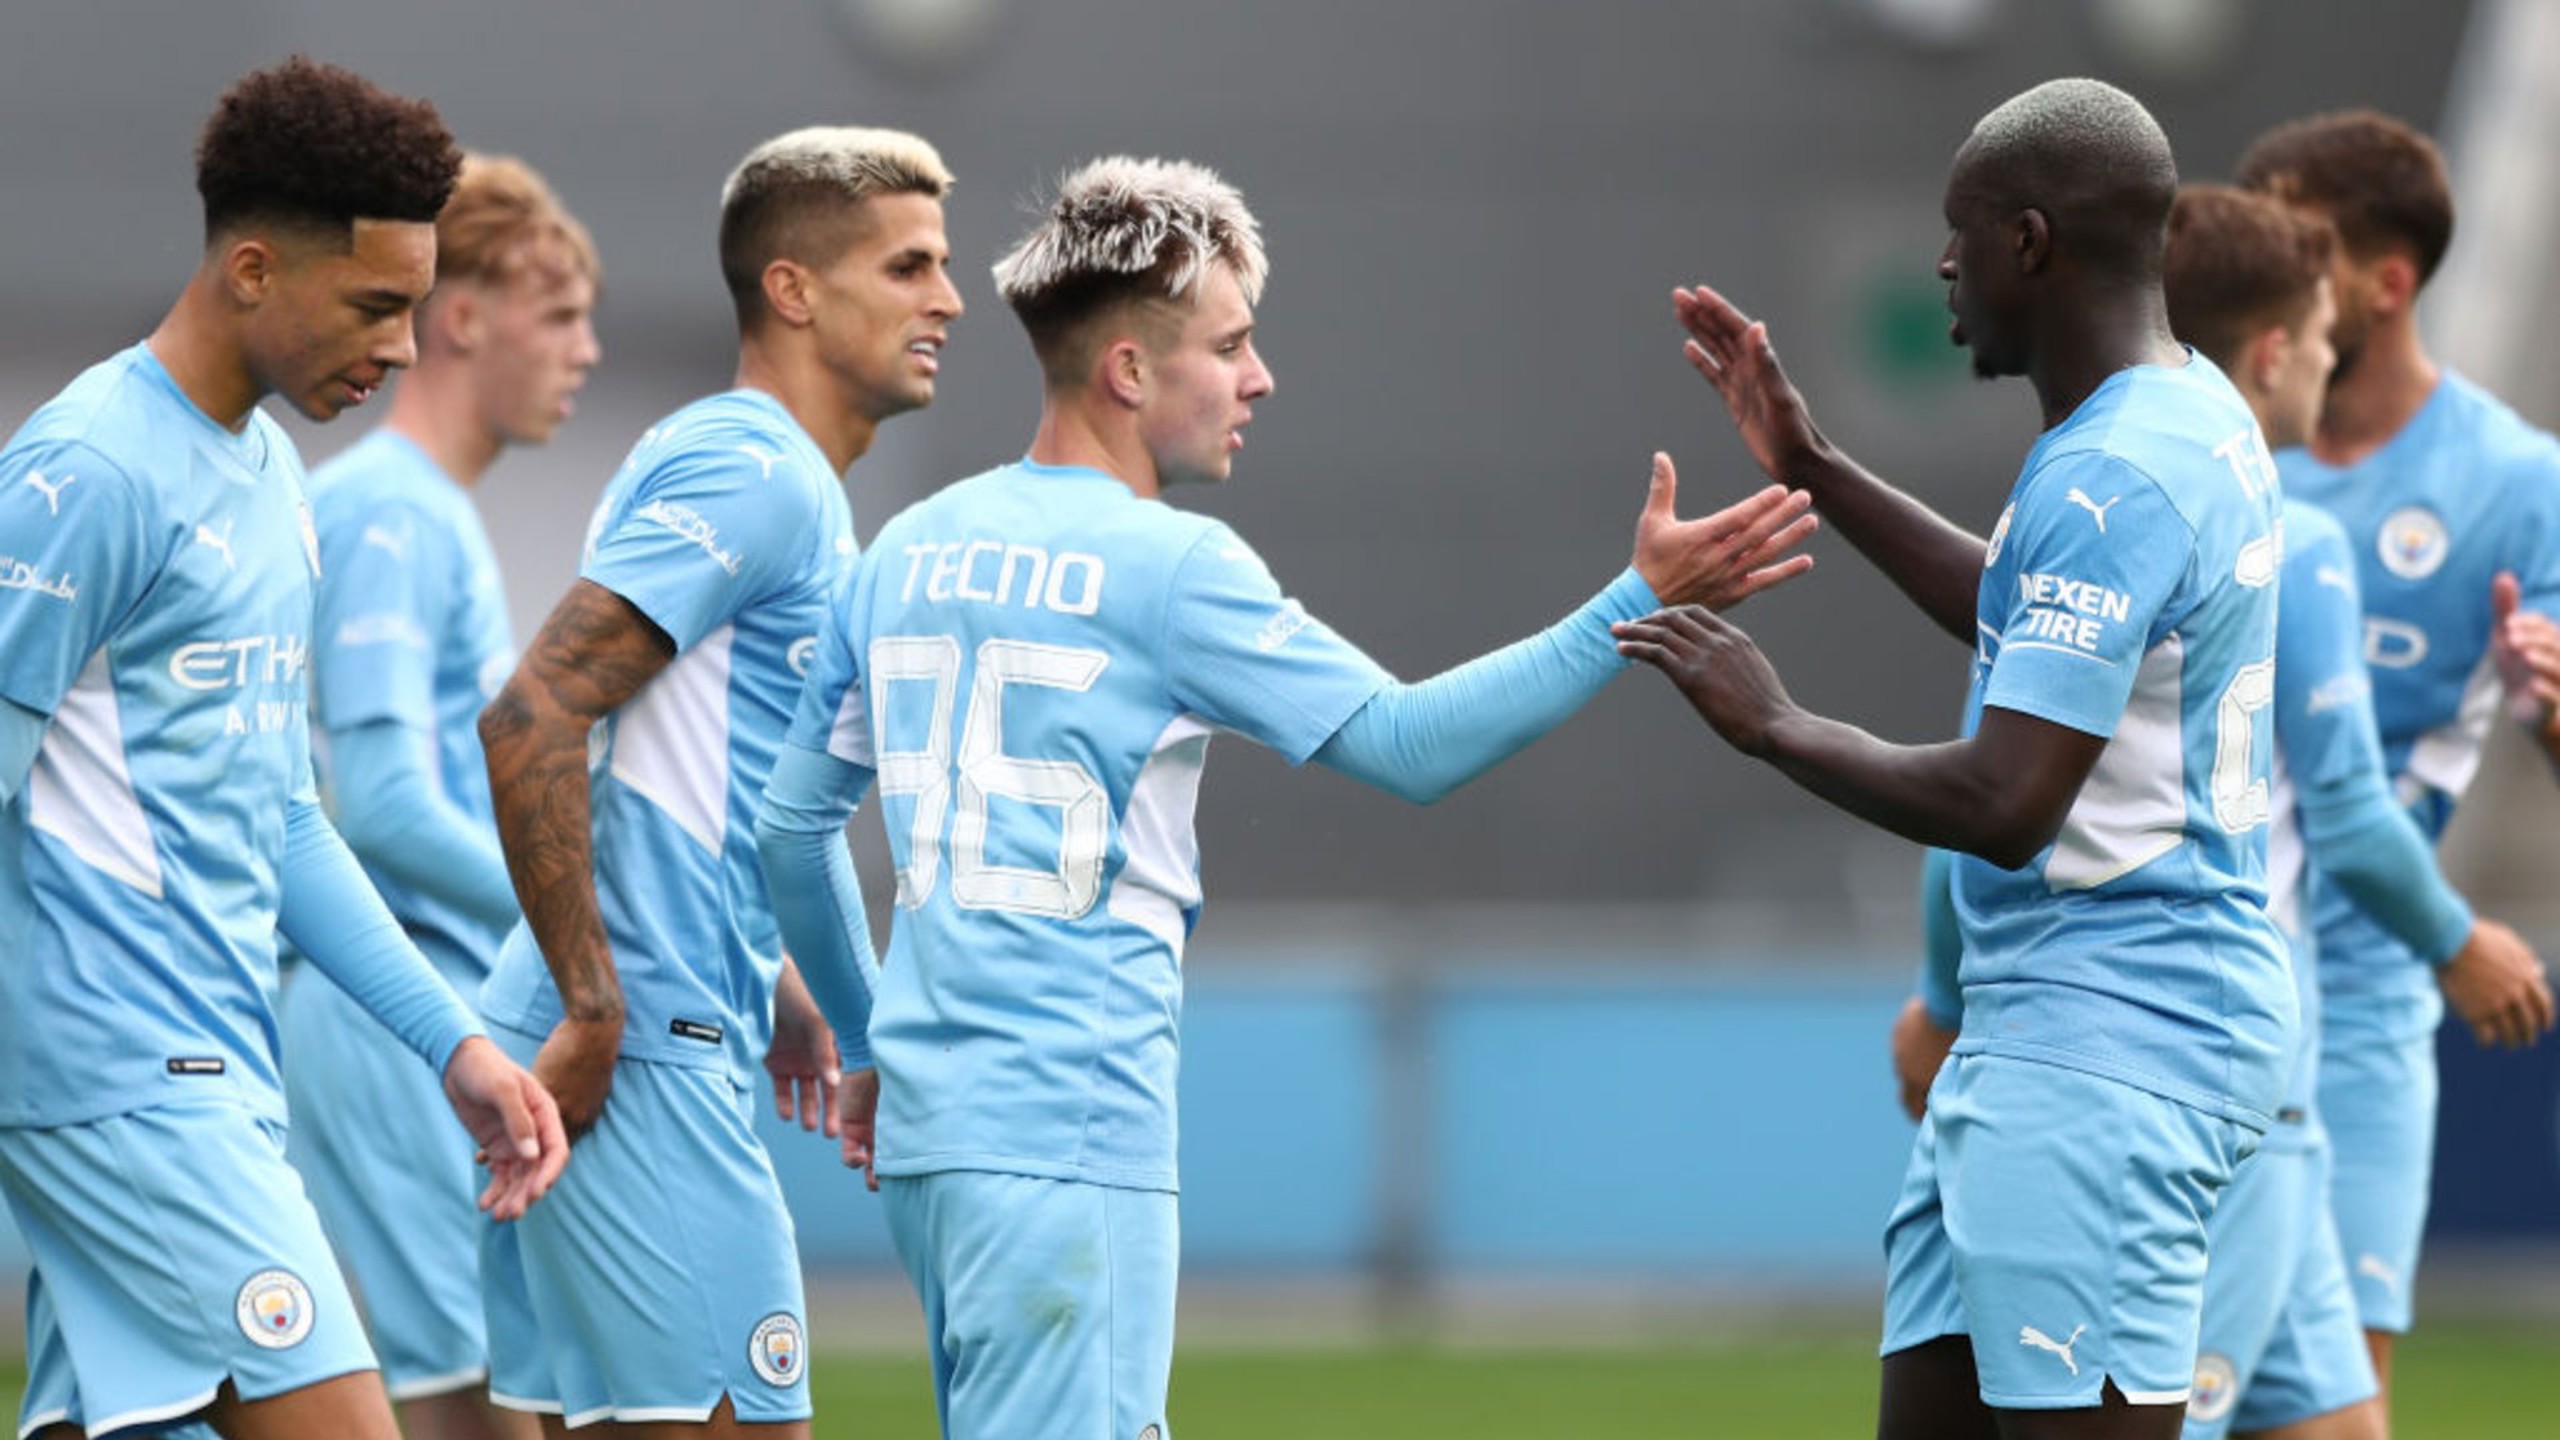 City overpower Barnsley to seal second pre-season victory 